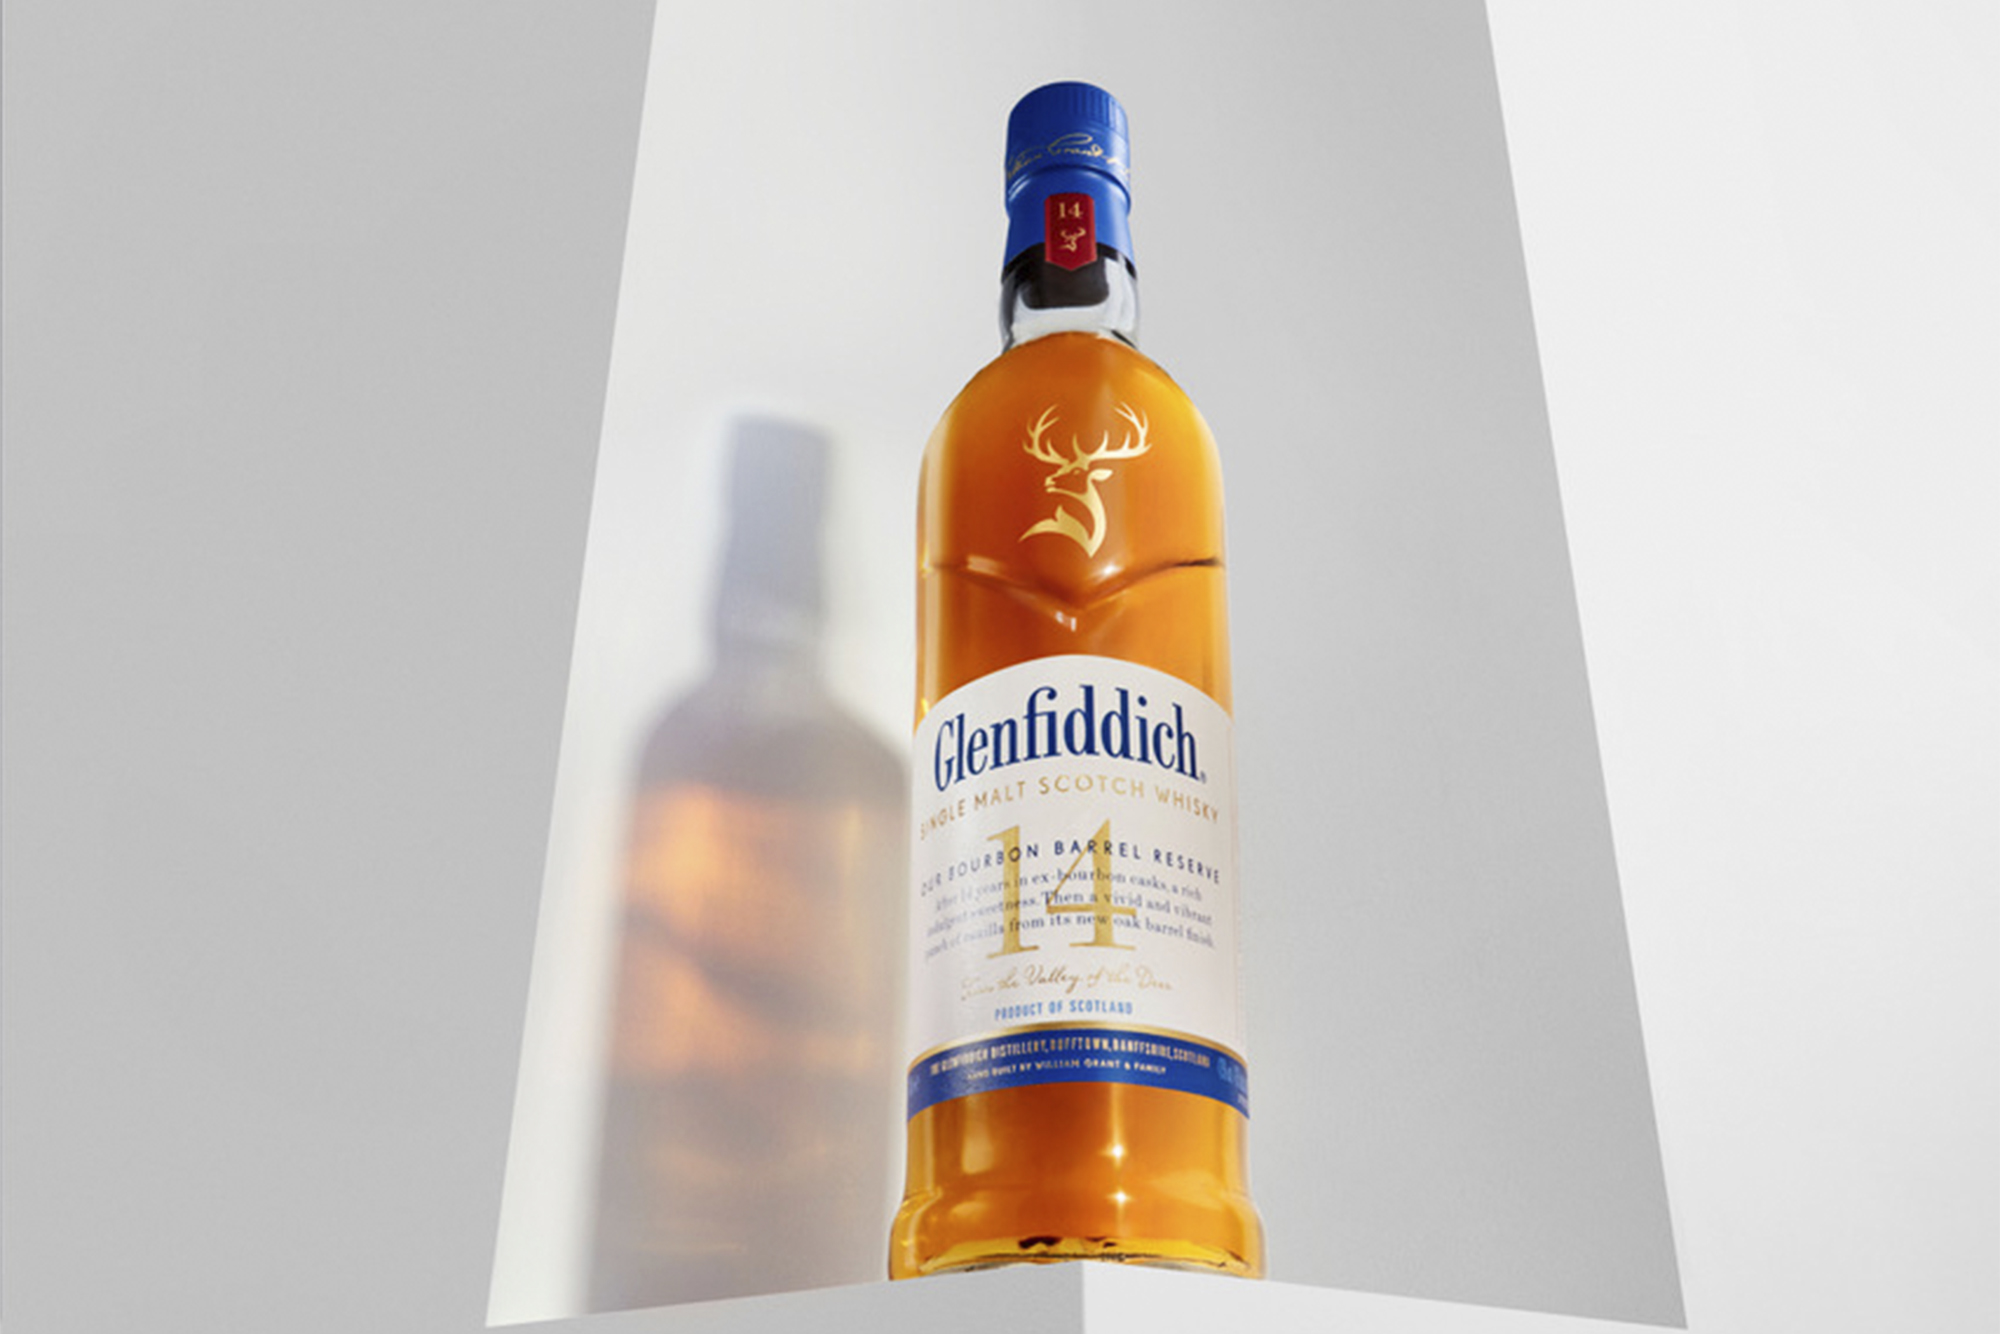 Glenfiddich Tasting Guide 14 year old